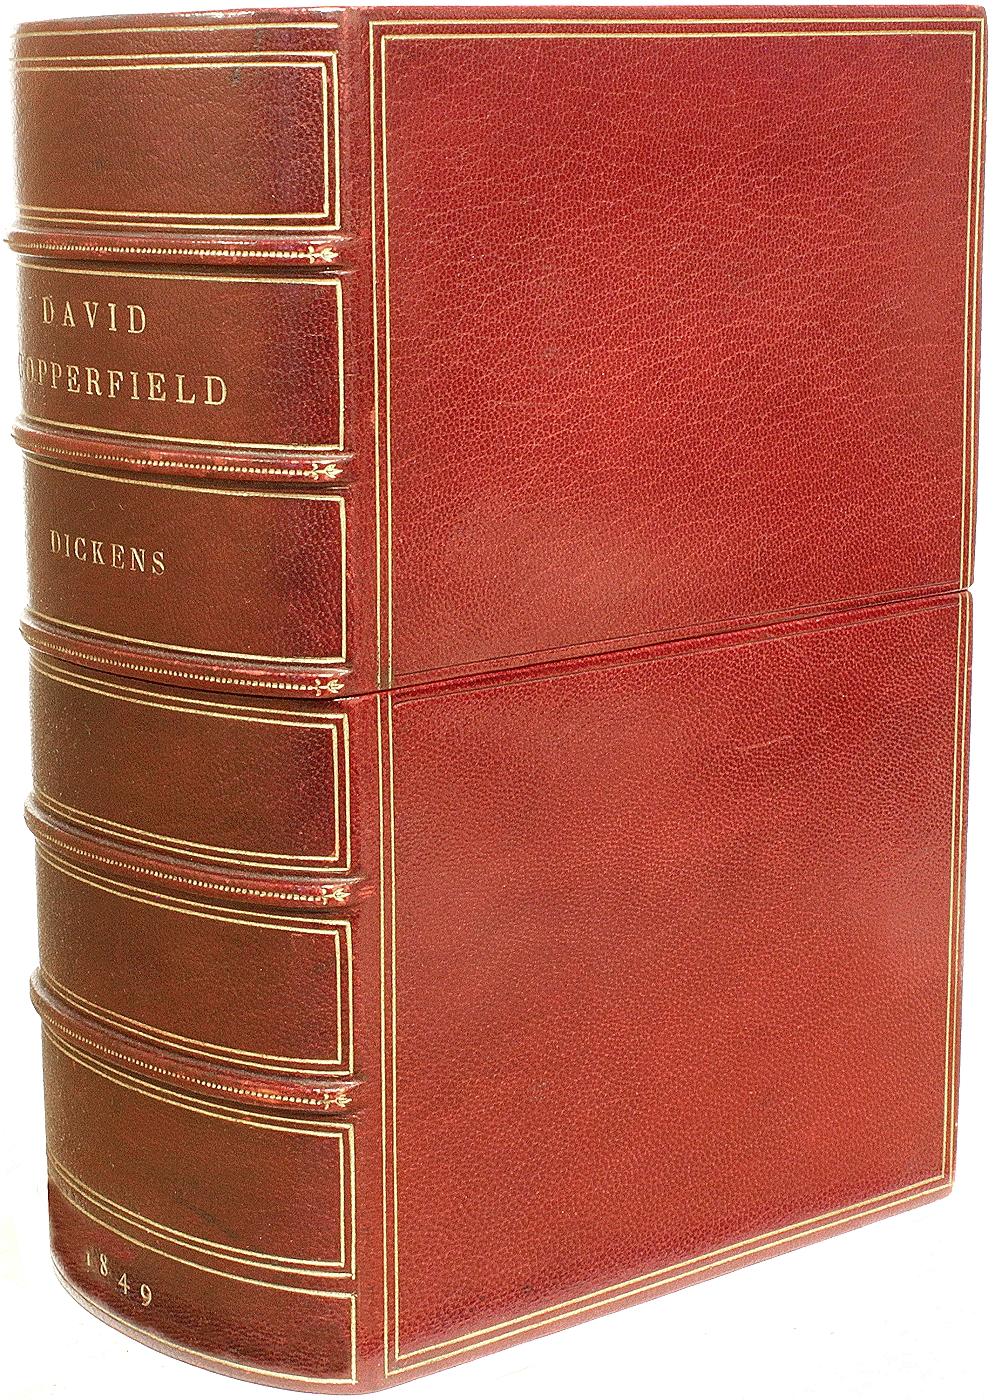 Mid-19th Century Charles DICKENS. David Copperfield. FIRST EDITION IN MONTHLY PARTS A PERFECT SET For Sale